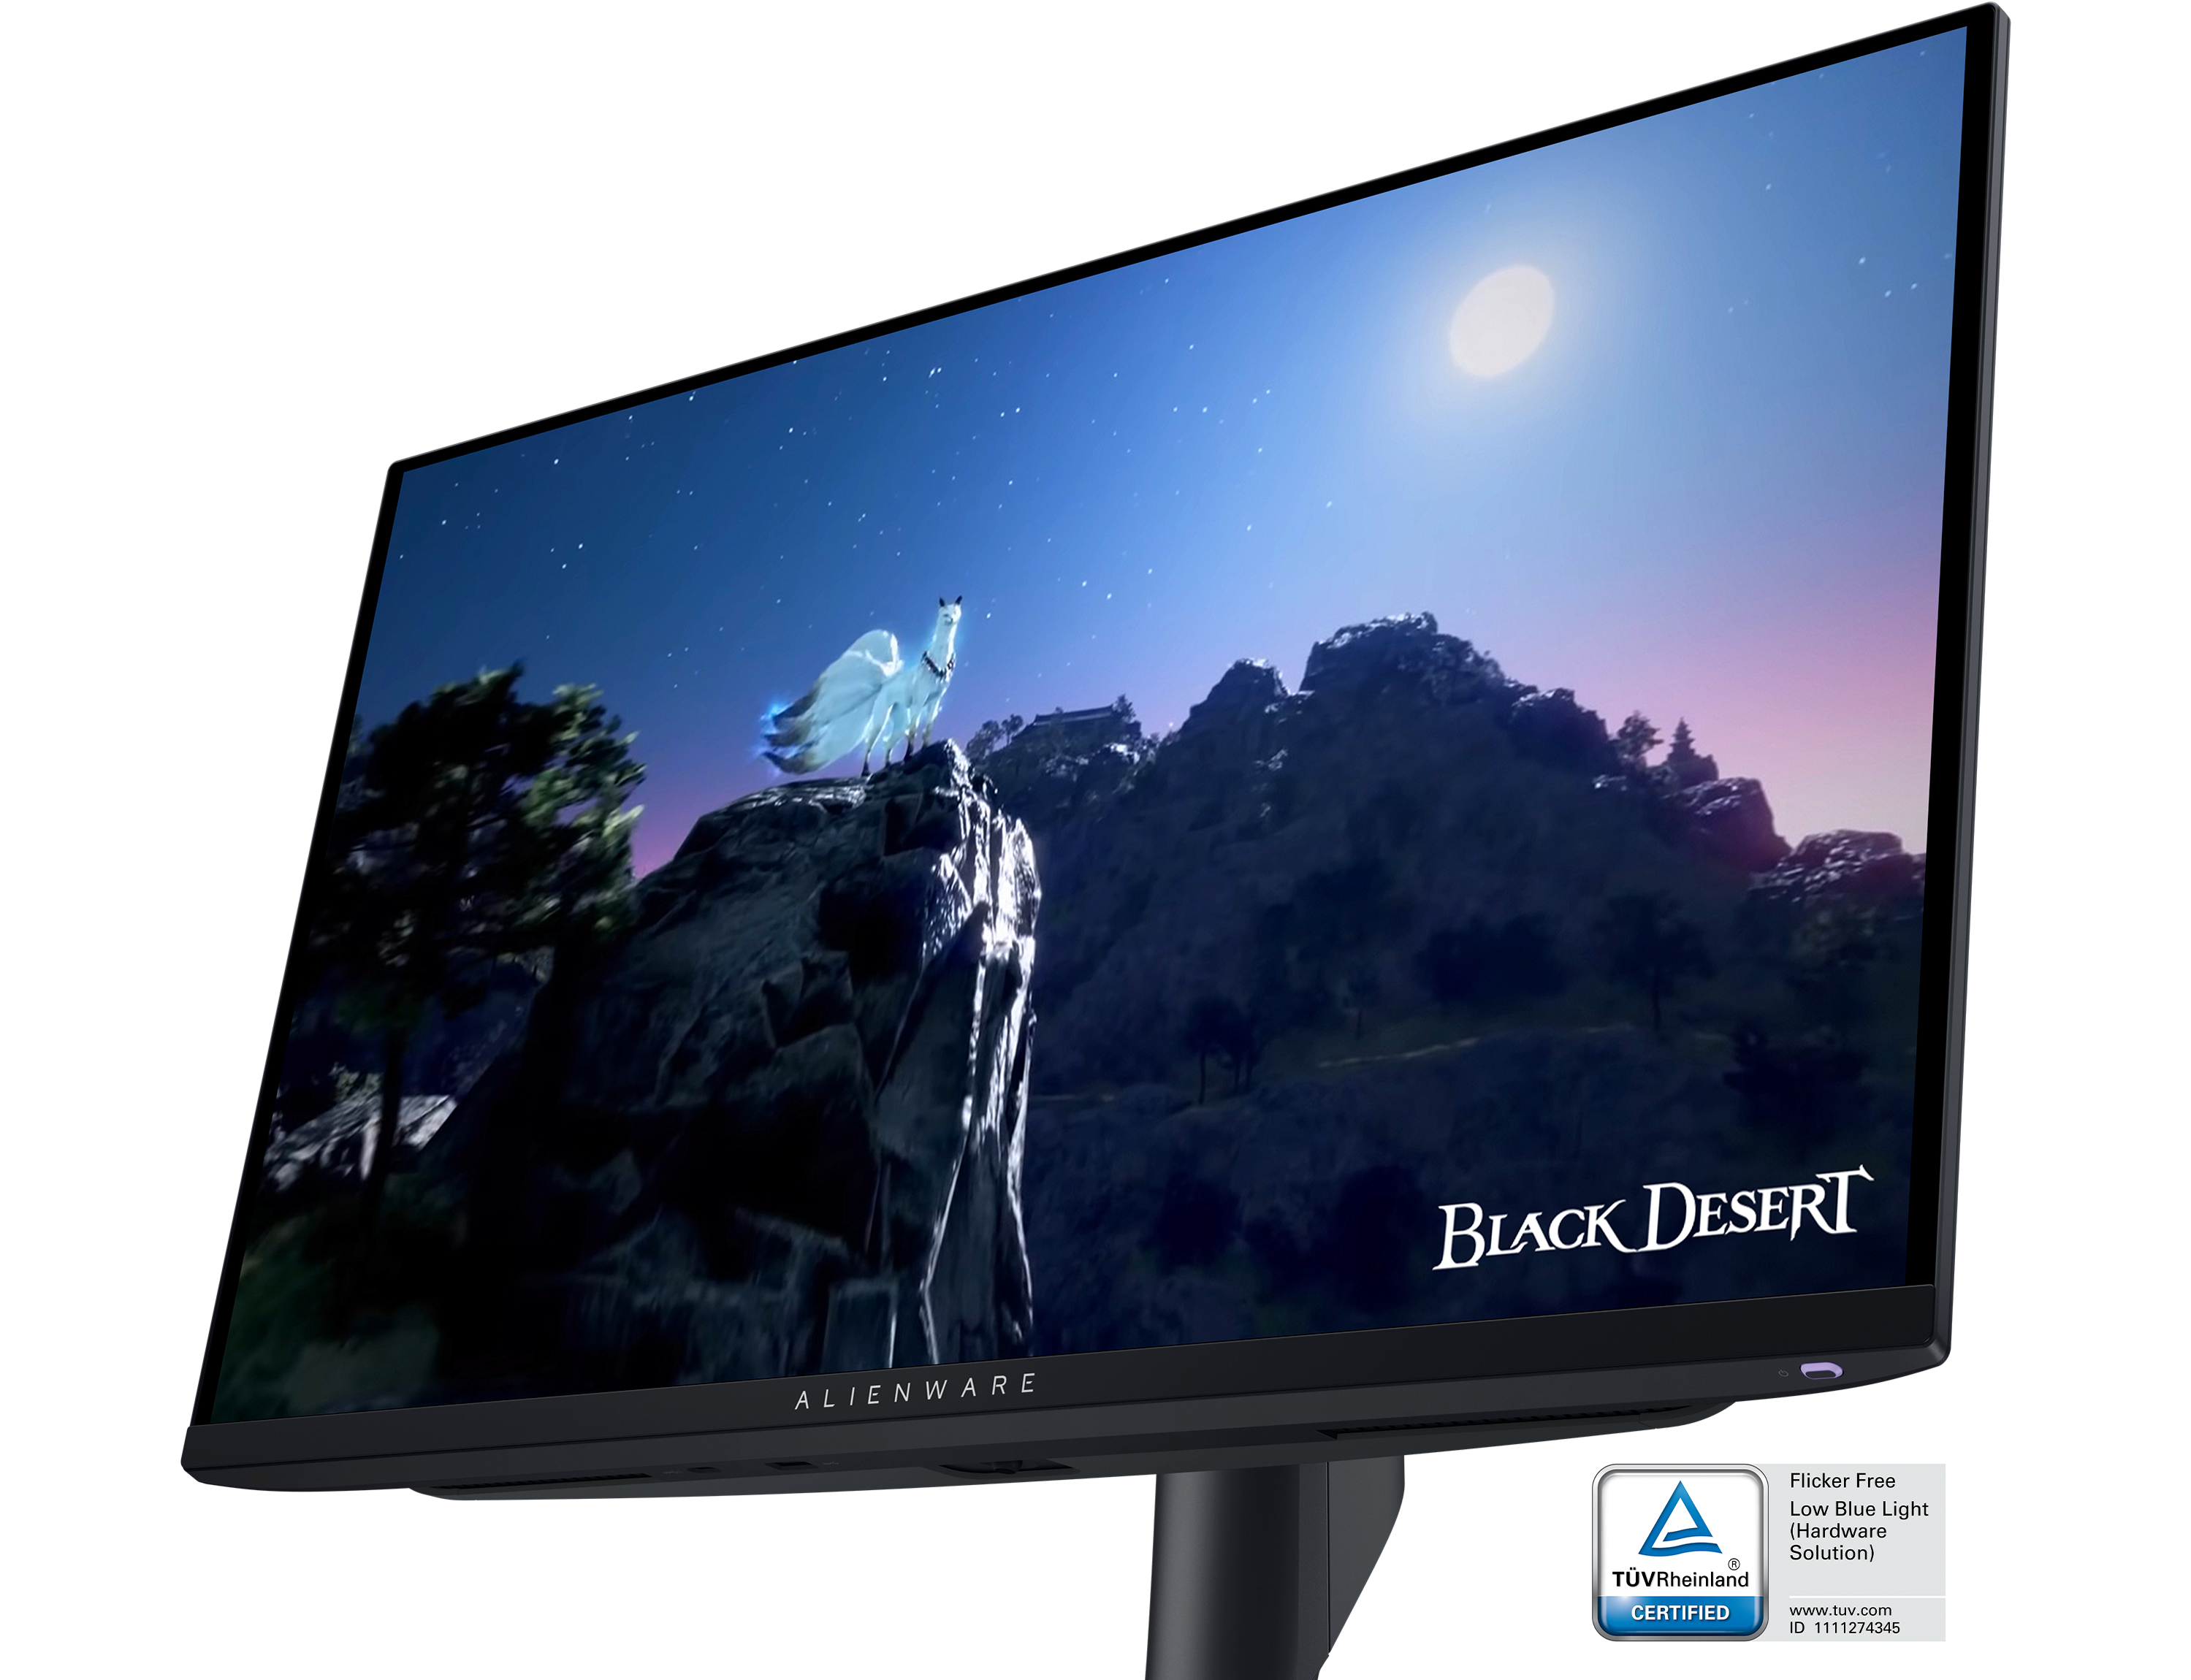 Dell AW2725DF Gaming Monitor with a Black Desert game image on the screen.